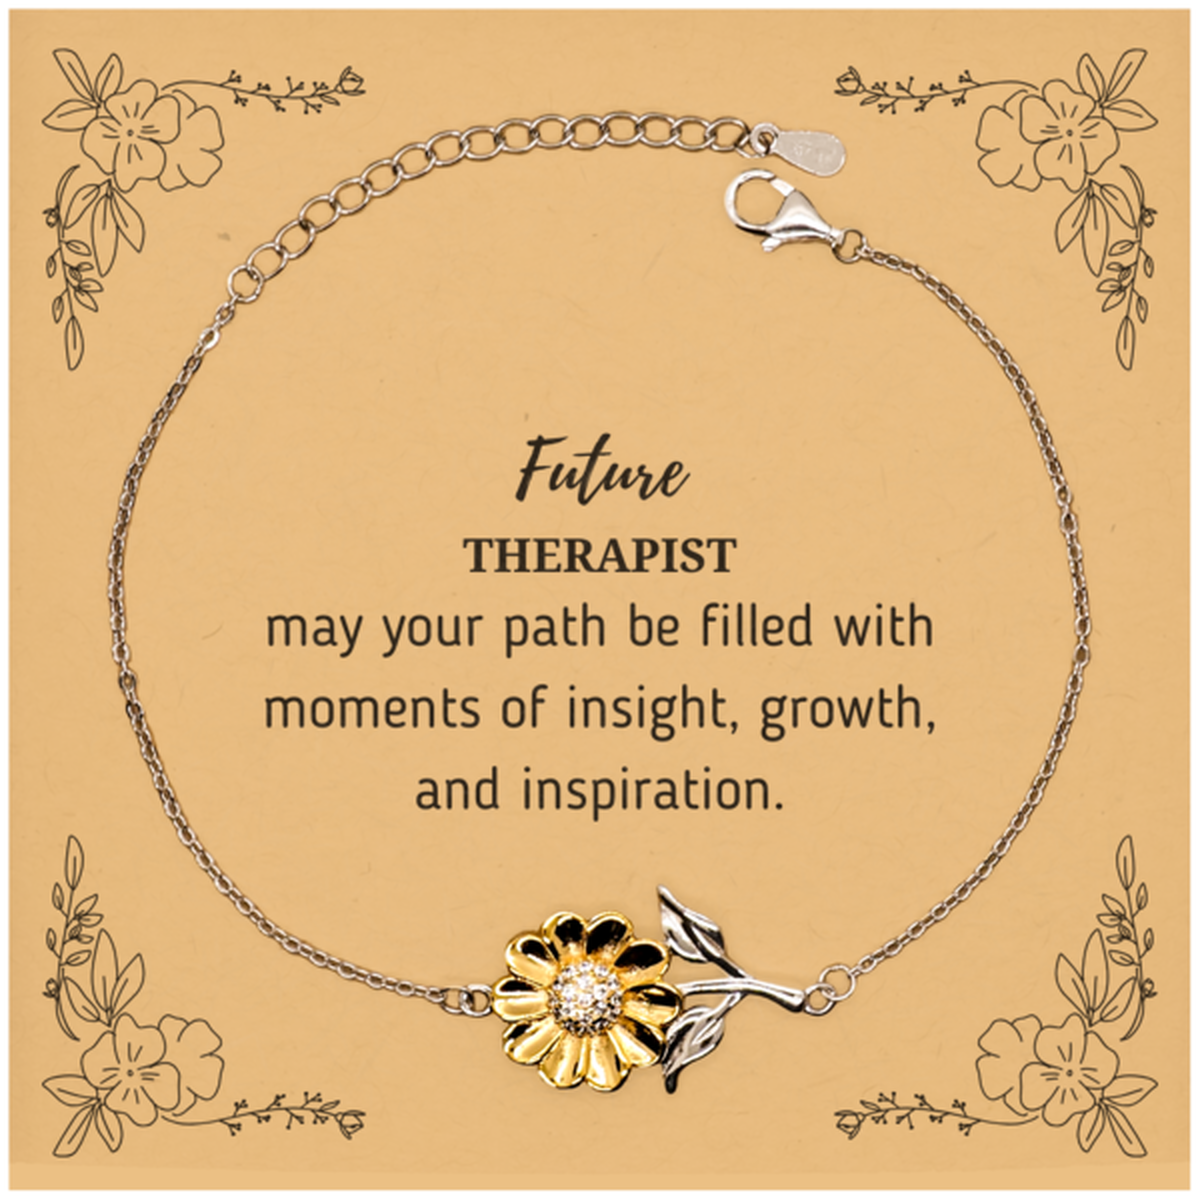 Future Therapist Gifts, May your path be filled with moments of insight, Graduation Gifts for New Therapist, Christmas Unique Sunflower Bracelet For Men, Women, Friends